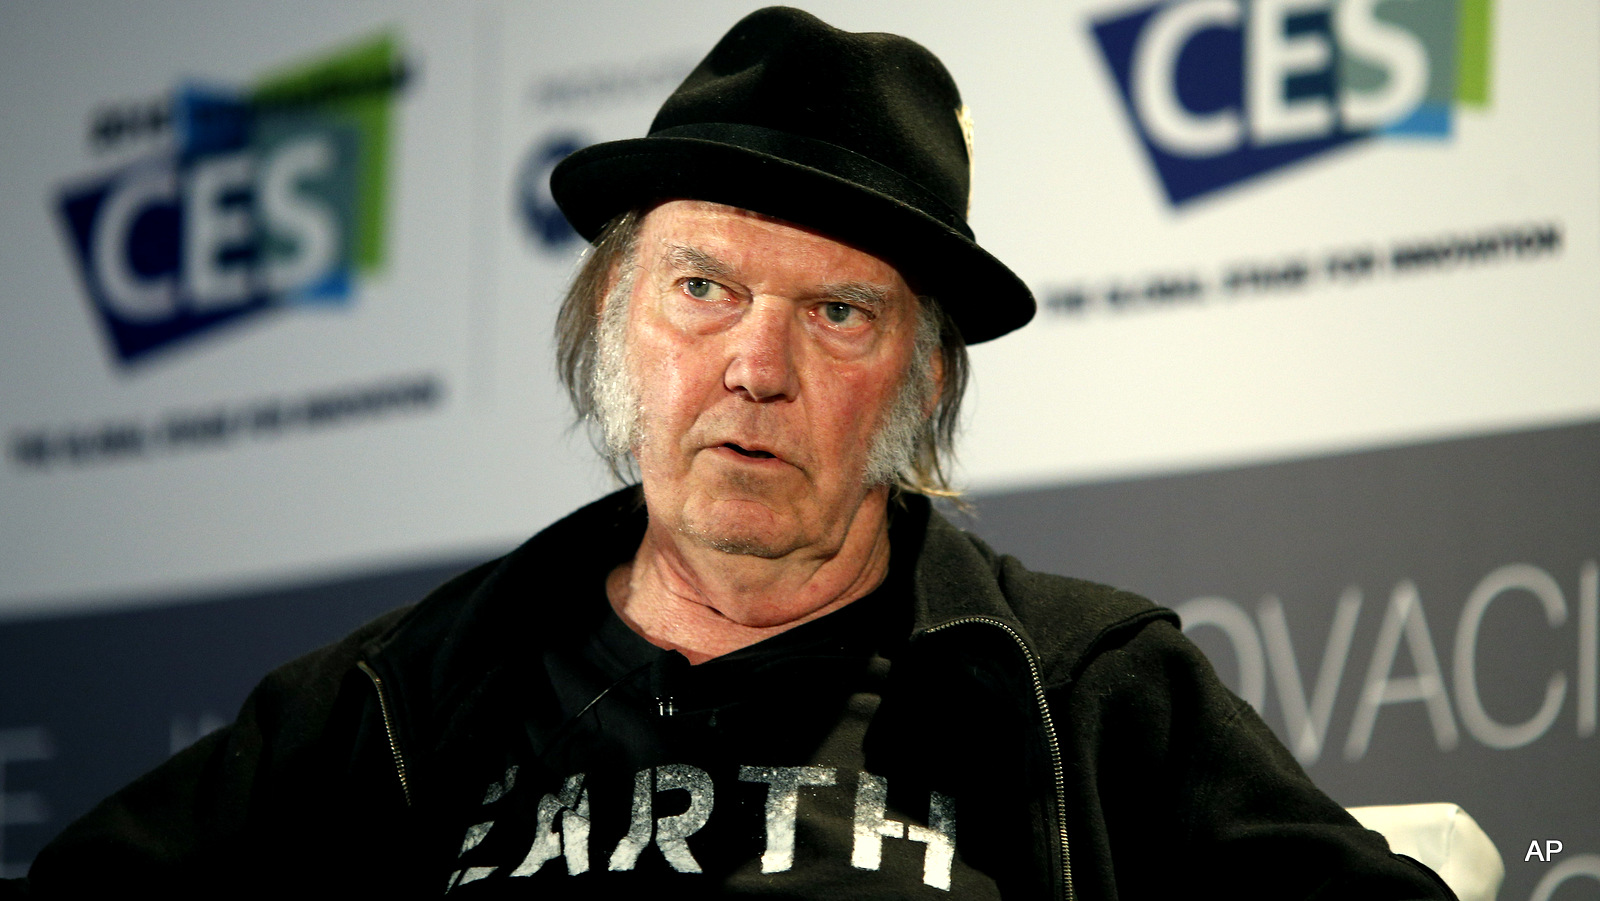 Musician Neil Young speaks during a session at the International CES Wednesday, Jan. 7, 2015, in Las Vegas. 